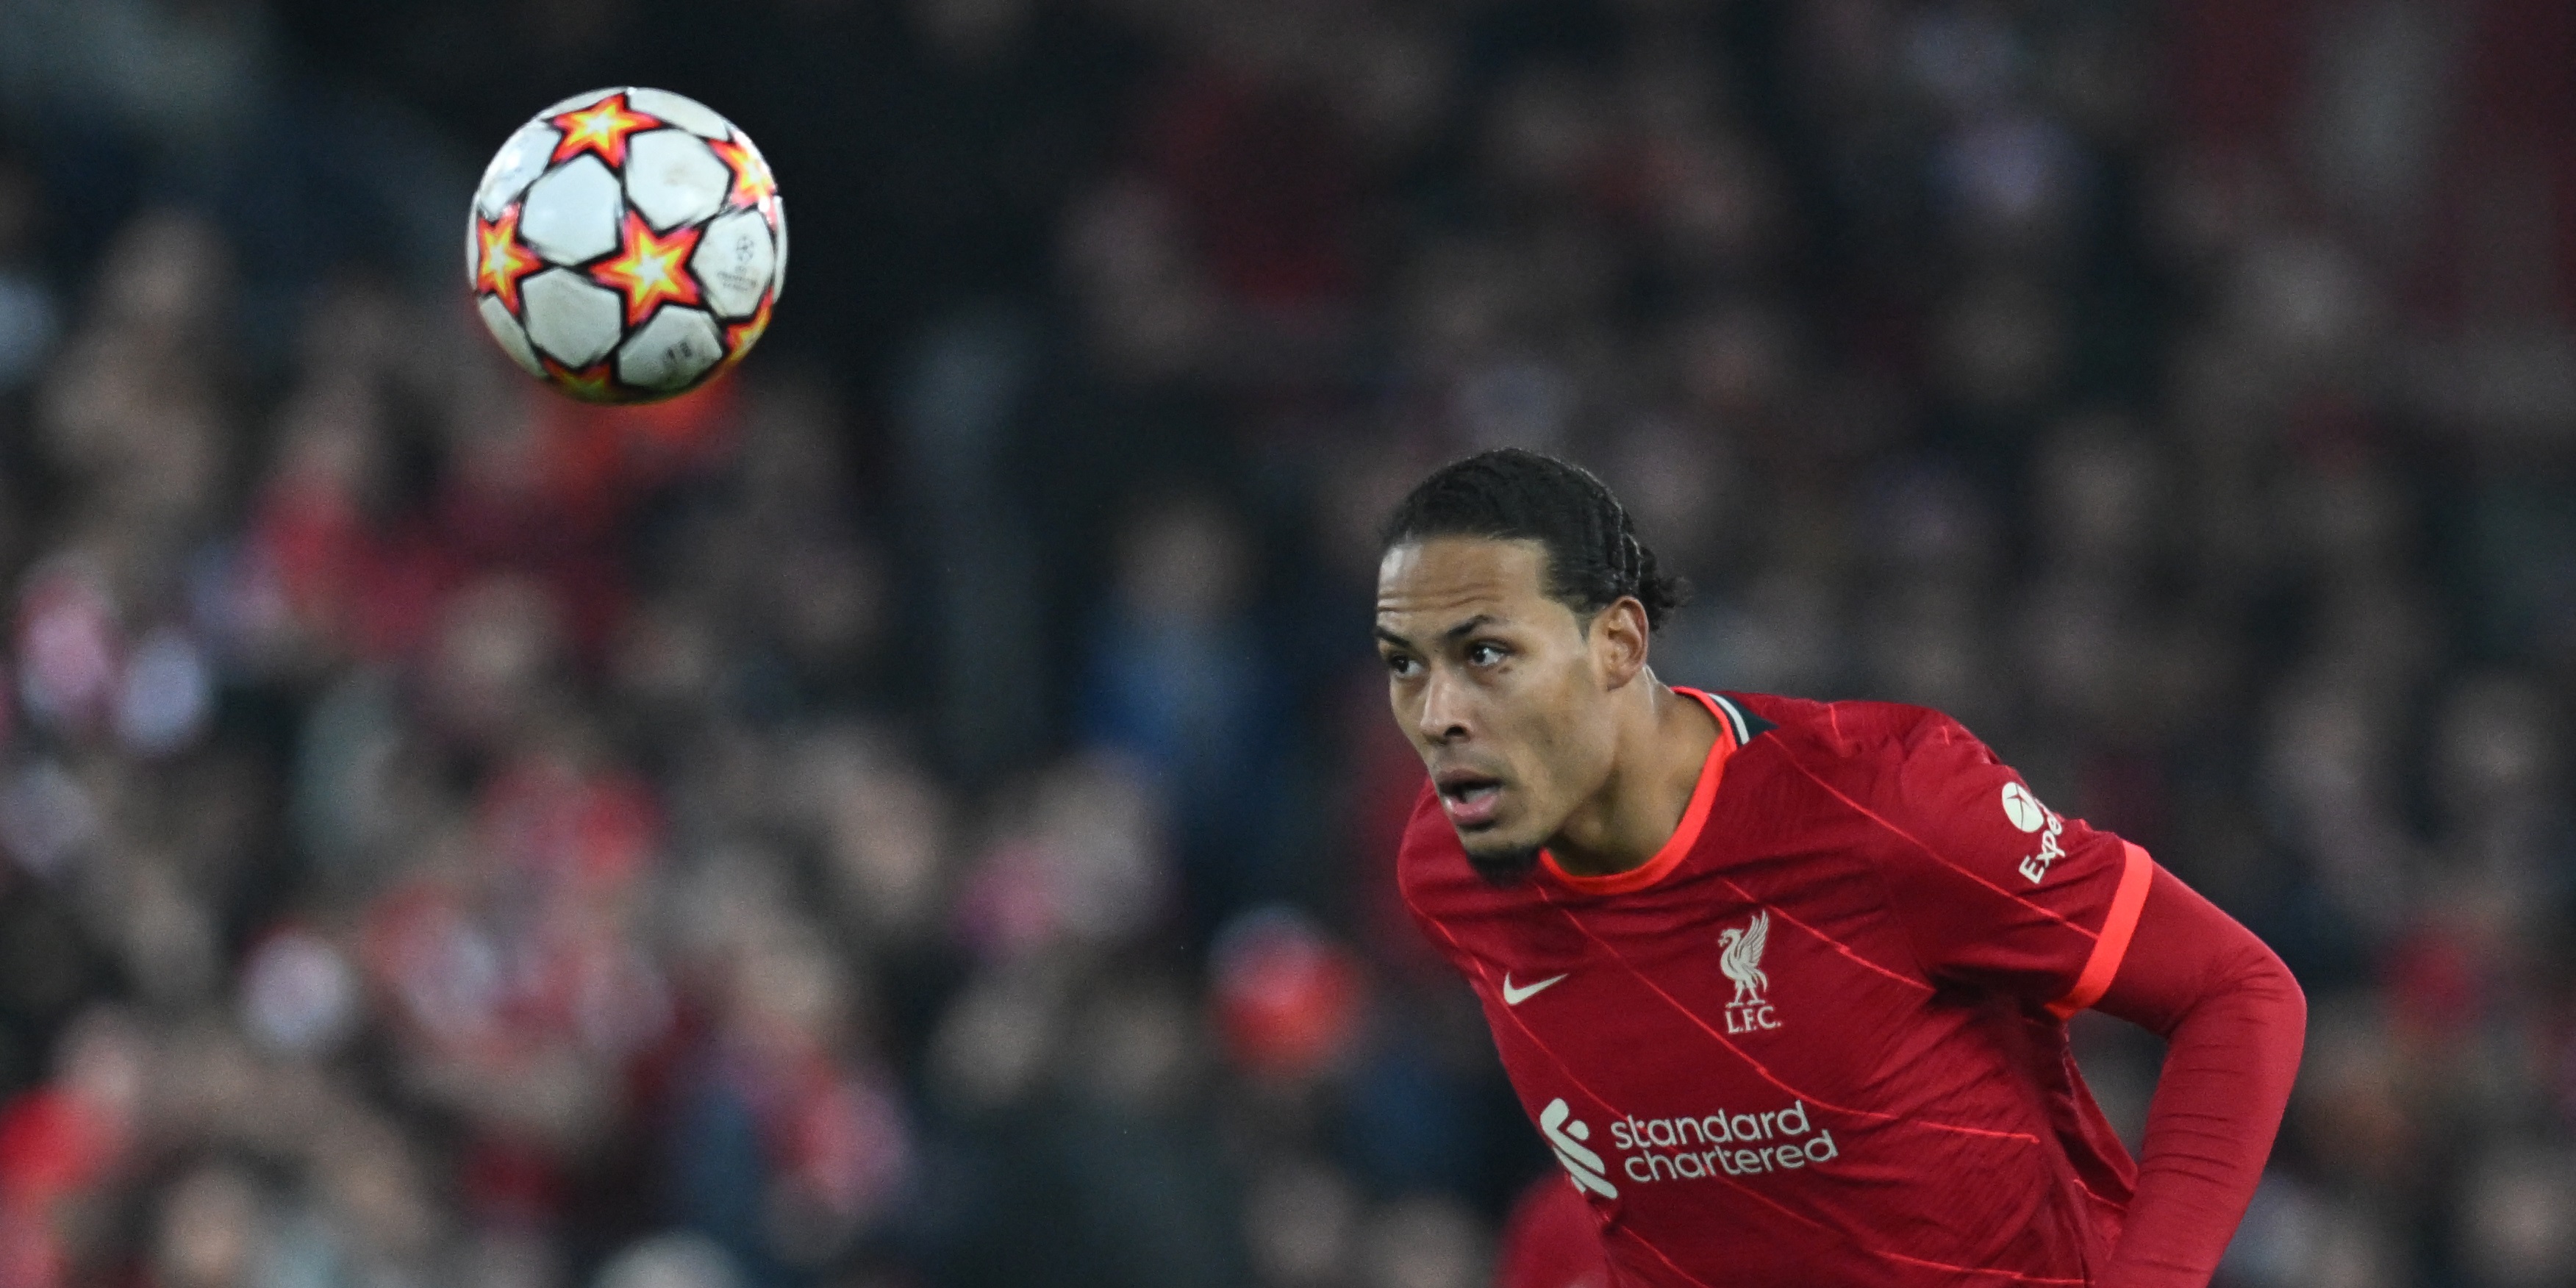 Virgil van Dijk ‘ready for a tough test’ against Benfica as he highlights one of the Portuguese side’s performances earlier this season that proves they are a threat